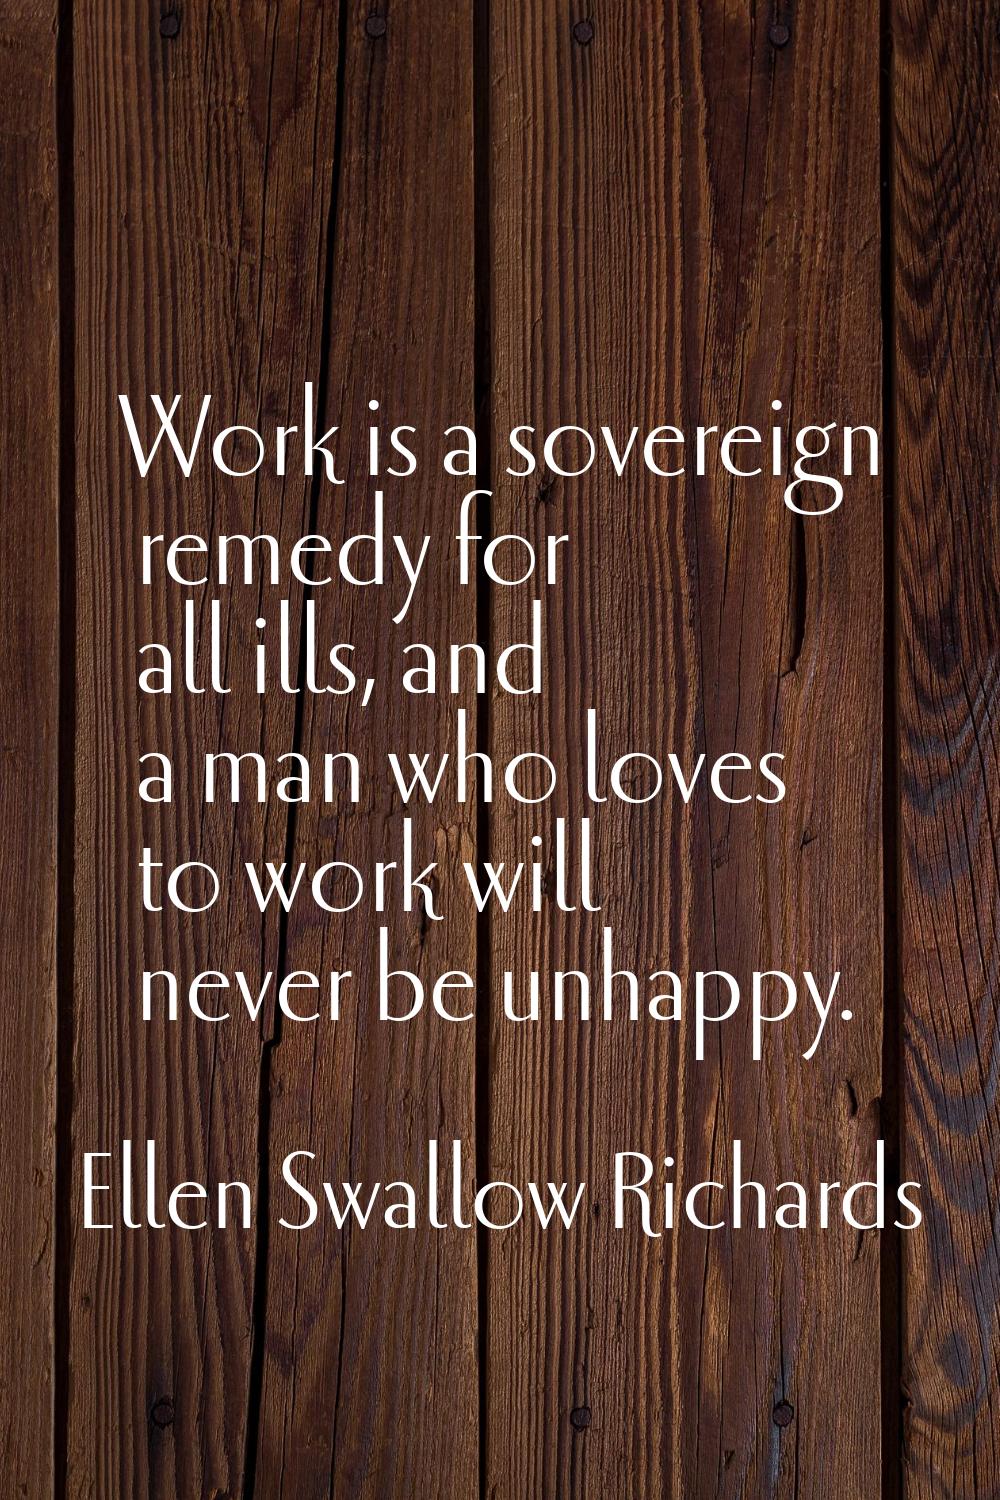 Work is a sovereign remedy for all ills, and a man who loves to work will never be unhappy.